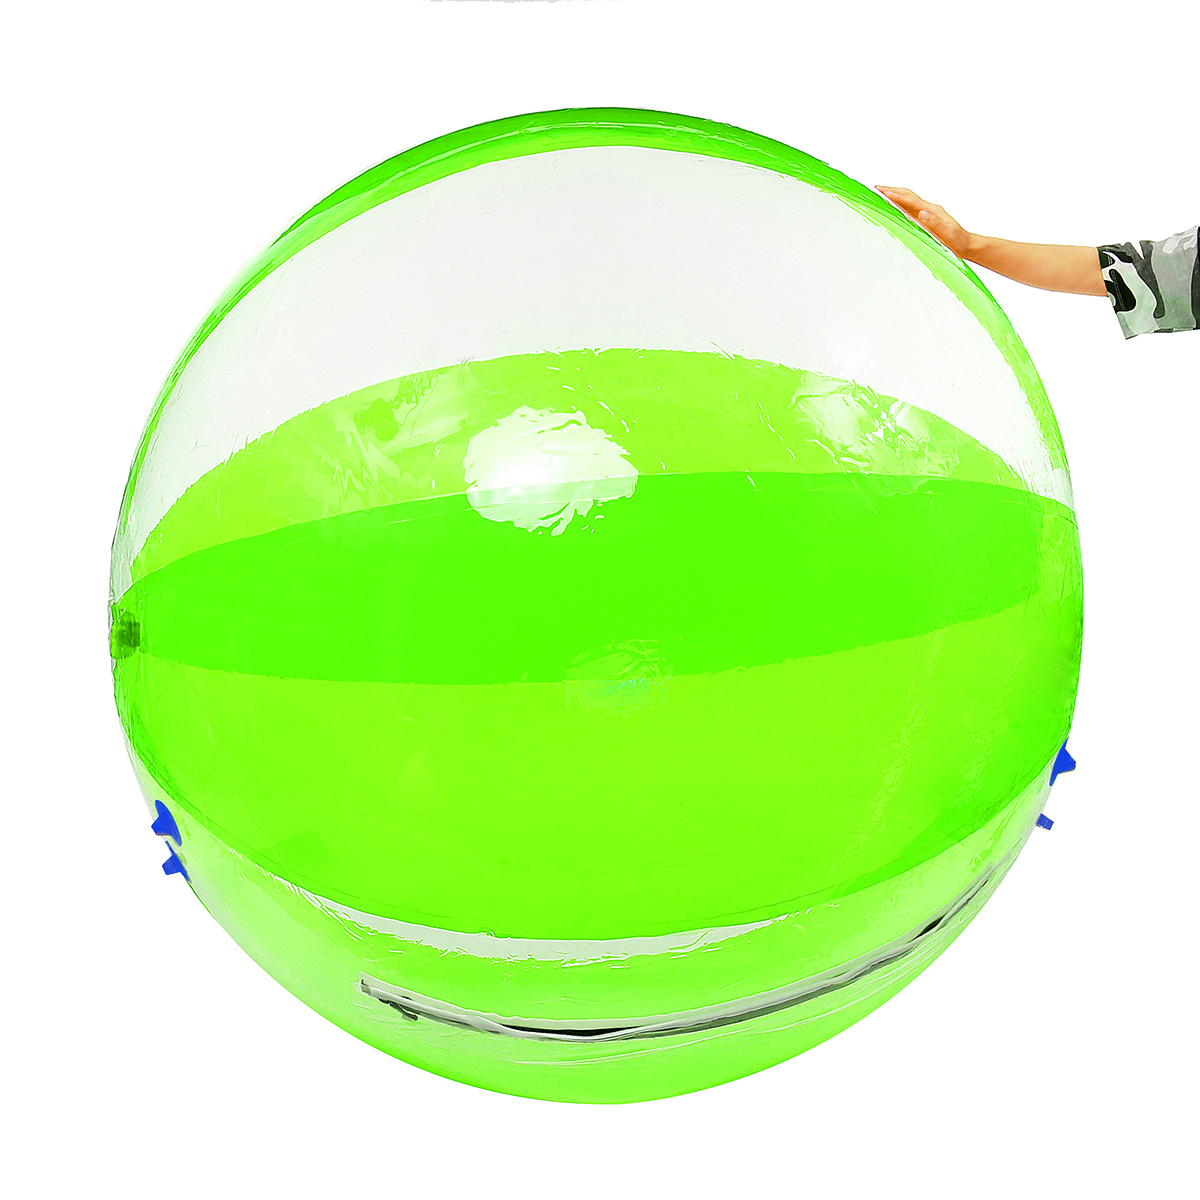 2M66ft-Inflatable-Float-PVC-Ball-Soft-Water-Walking-Ball-With-Zipper-Swimming-Pool-Rolling-Dance-Bal-1710295-4